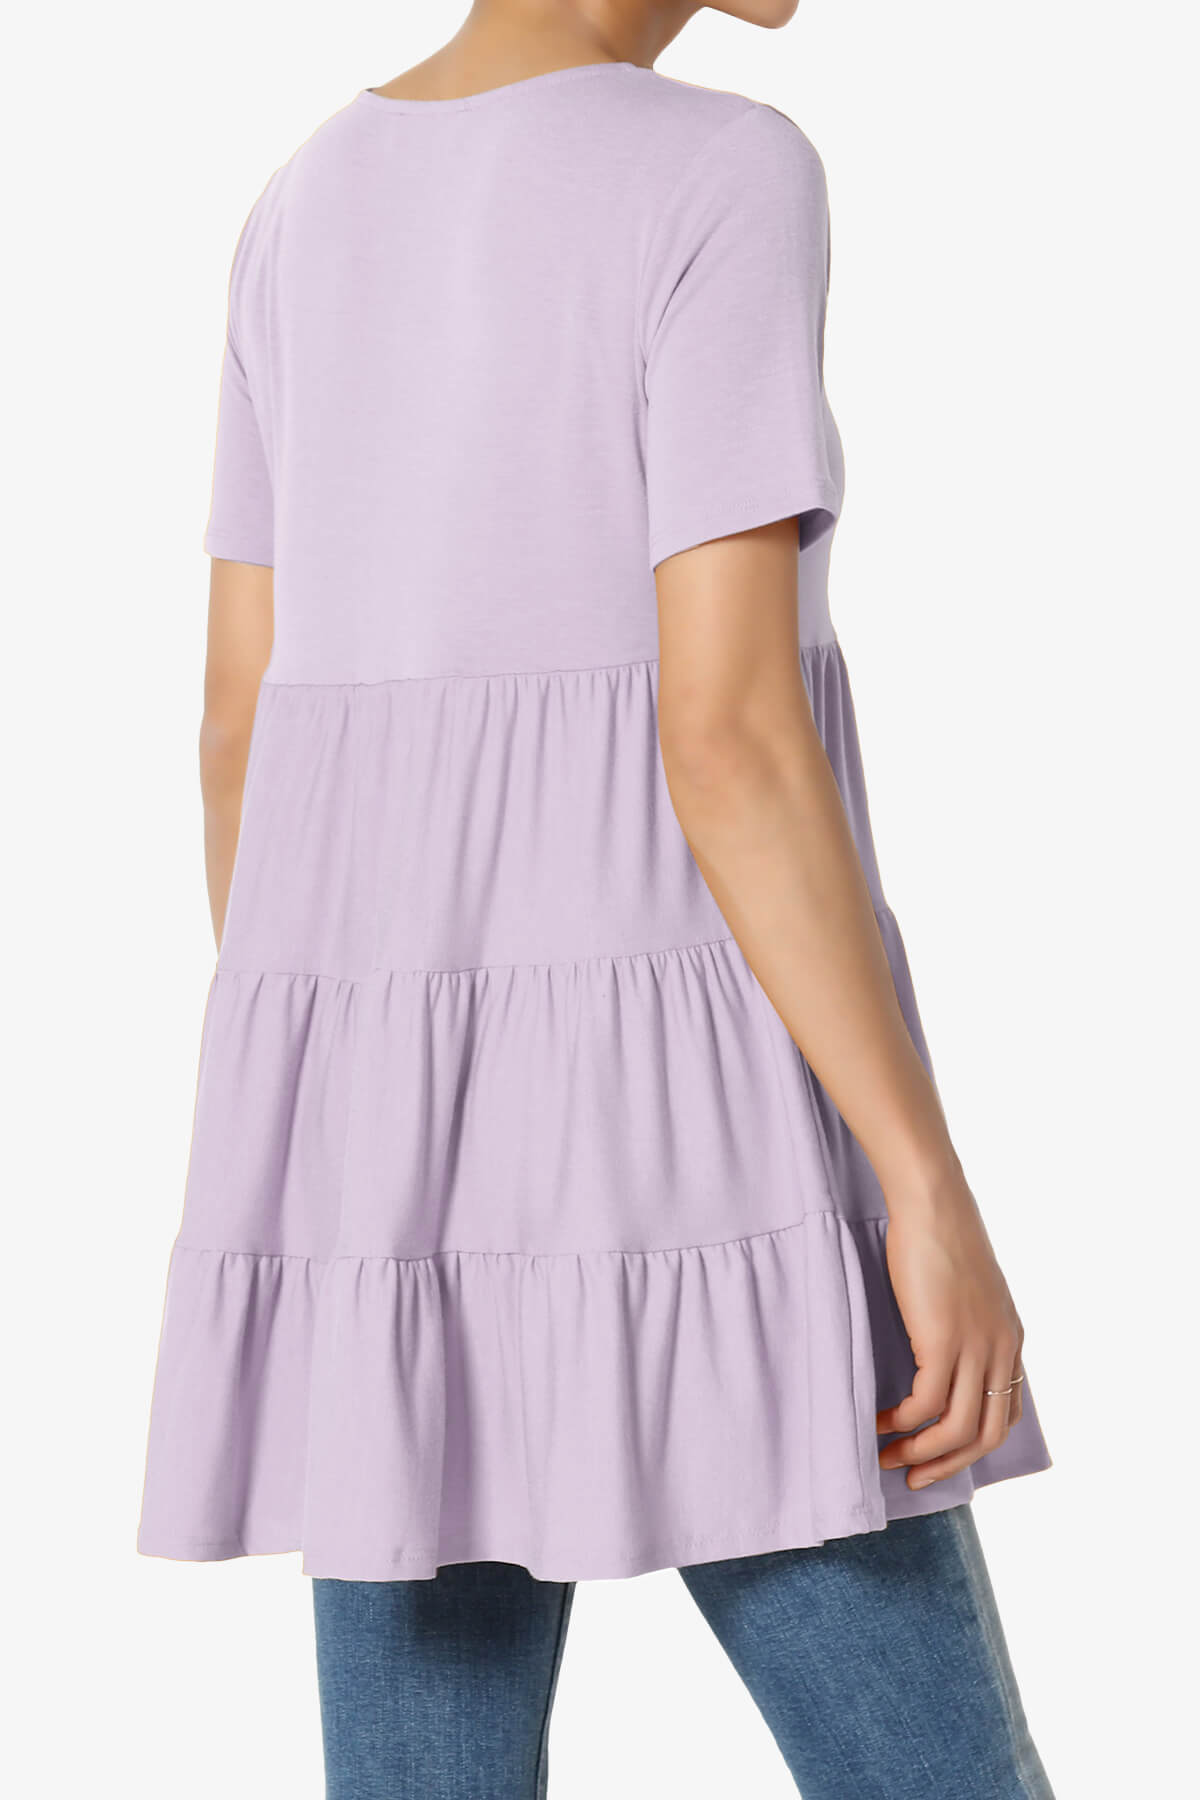 Load image into Gallery viewer, Maiika Short Sleeve Tiered Ruffle Tunic DUSTY LAVENDER_4
